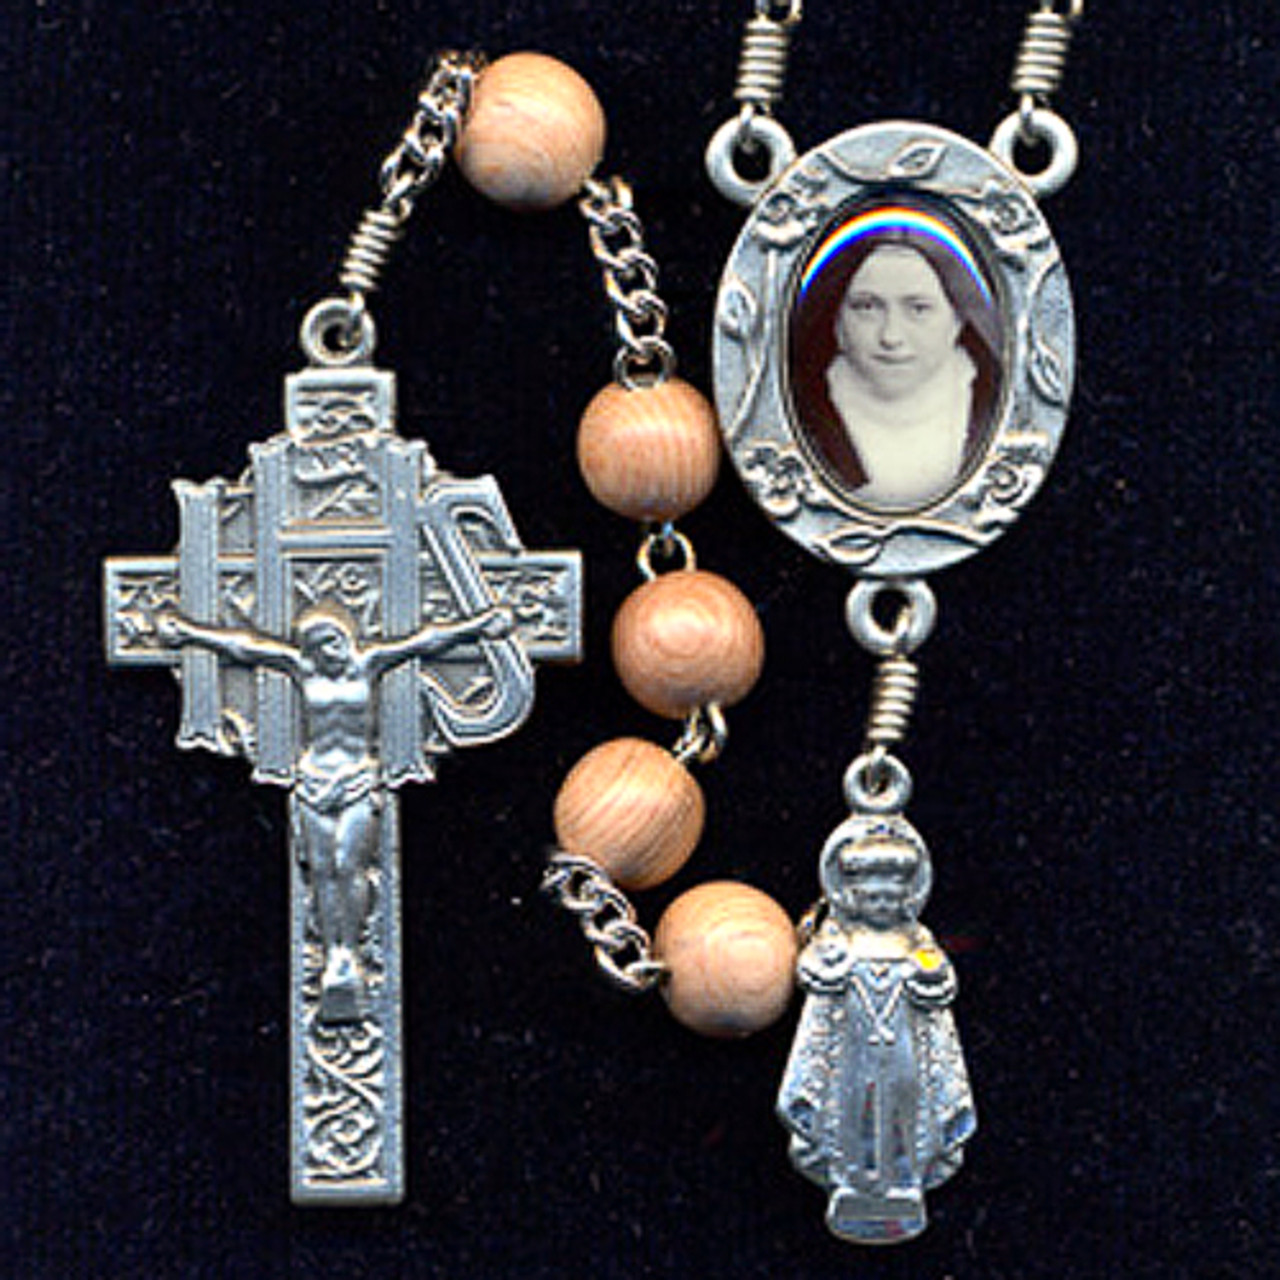 St. Therese de Lisieux Mini Rosary